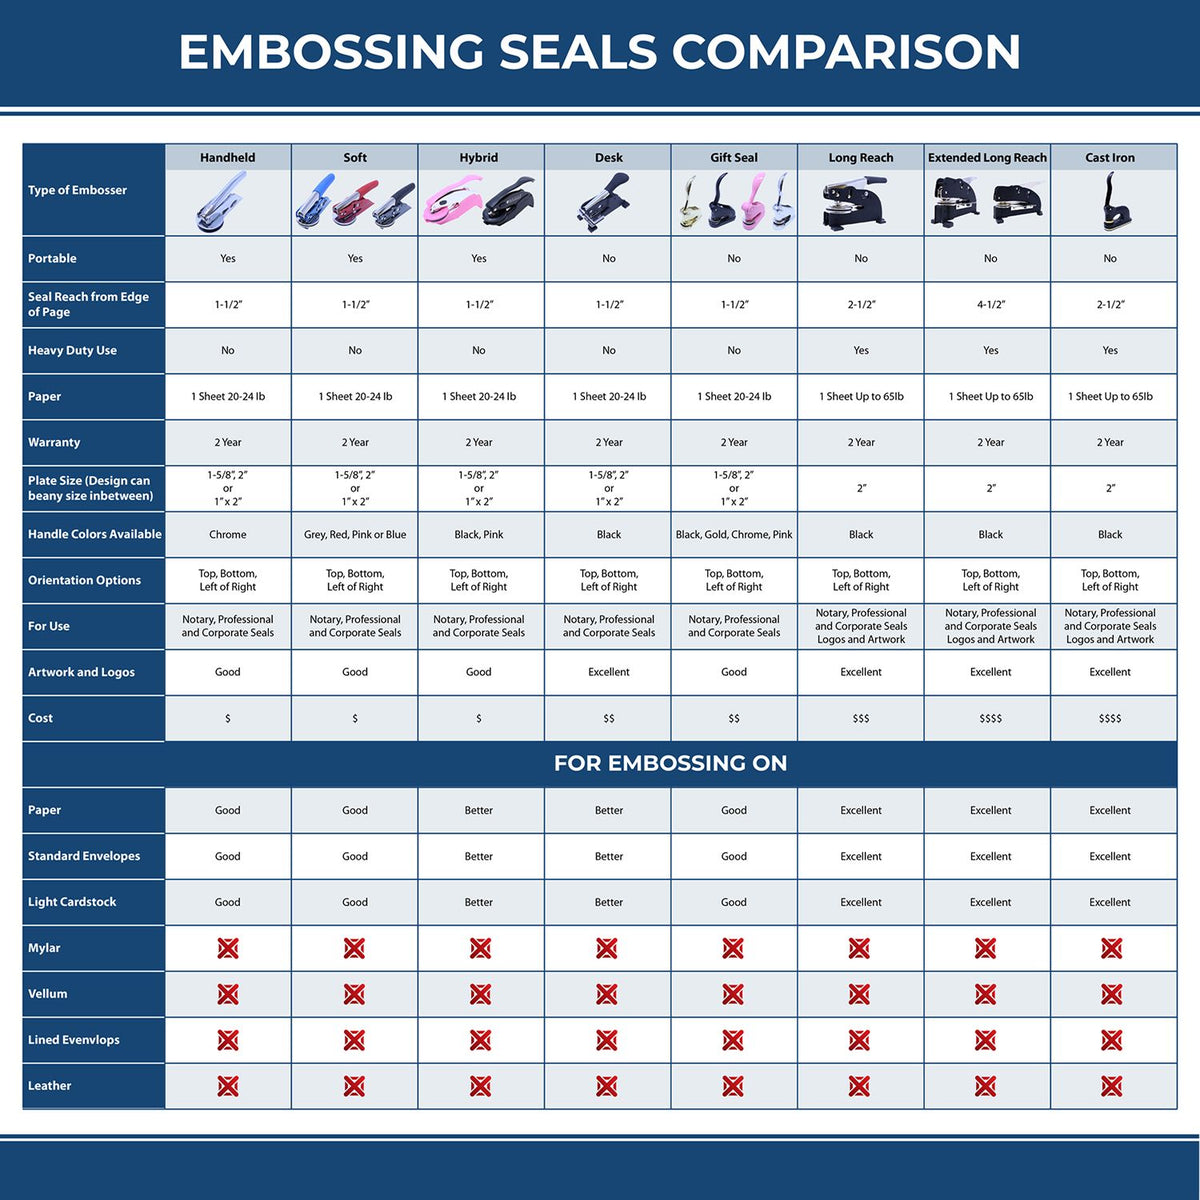 A comparison chart for the different types of mount models available for the Heavy Duty Cast Iron Nevada Engineer Seal Embosser.